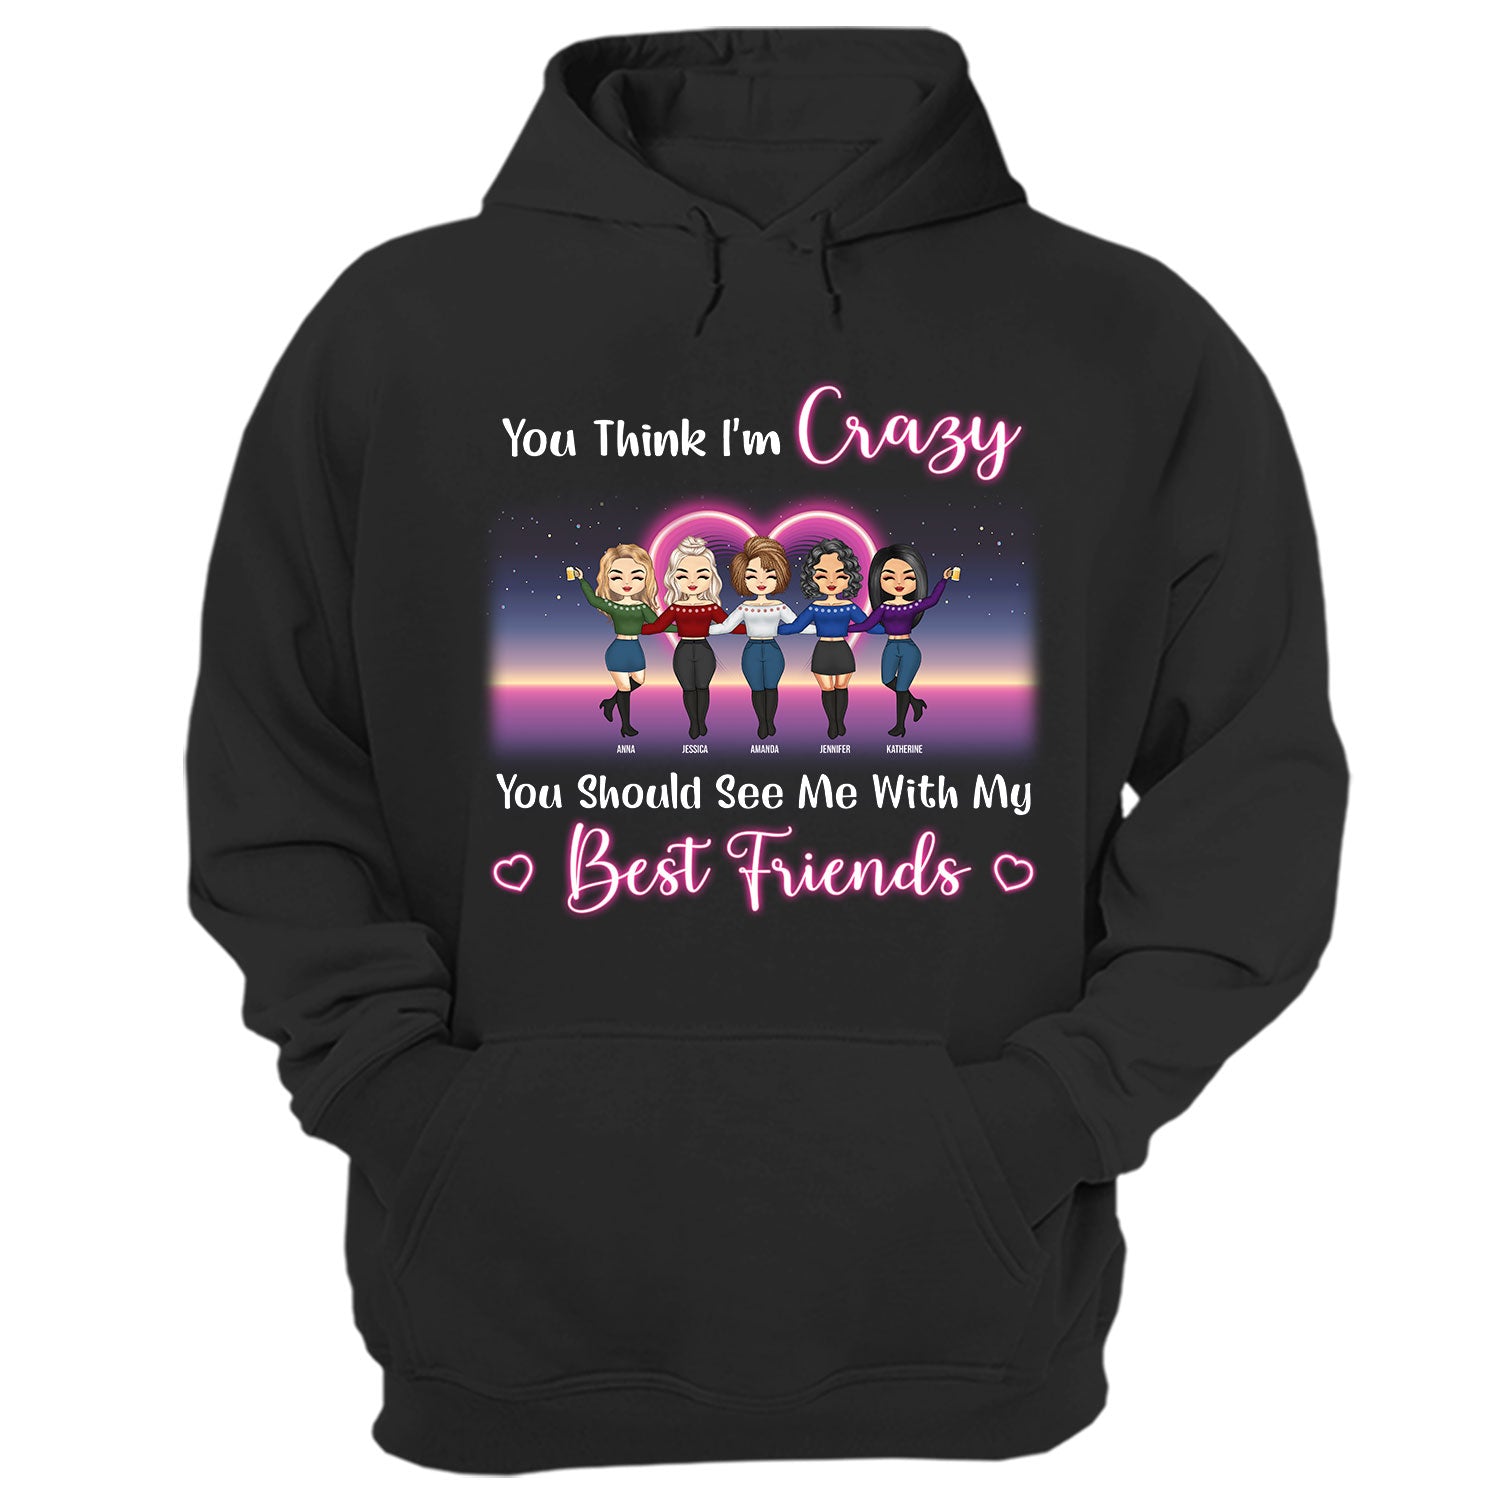 I'm Crazy You Should See Me With Best Friends - Birthday Gifts For Friends, Besties, Soul Sisters, BFF - Personalized Custom T Shirt